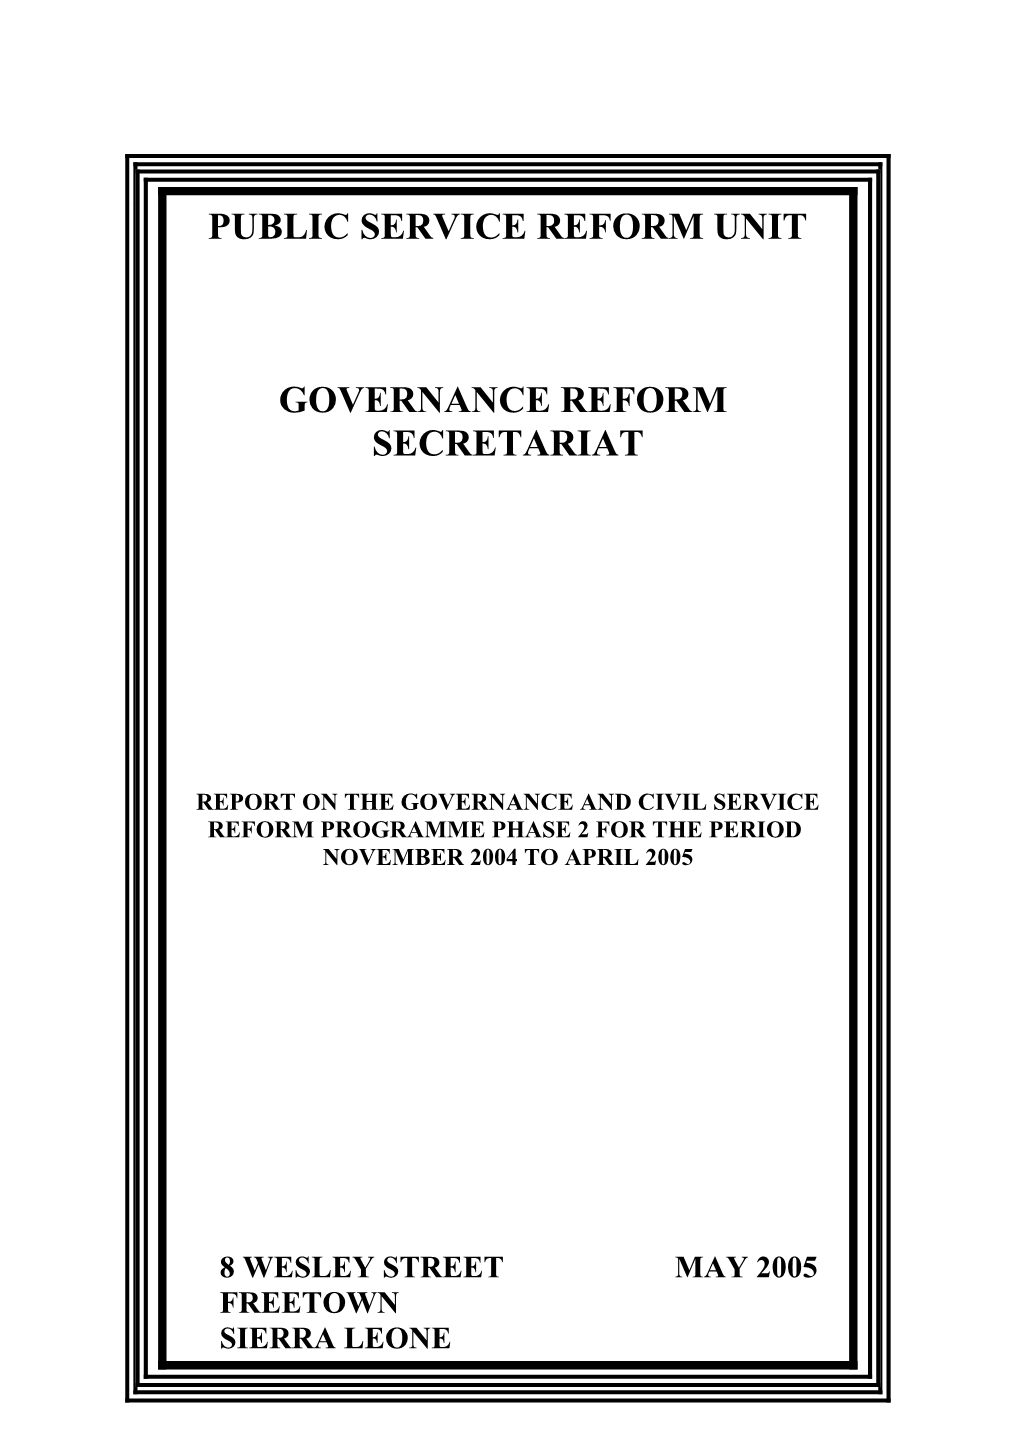 Report on the Governance and Civil Service Reform Programme Phase 2 for the Period November